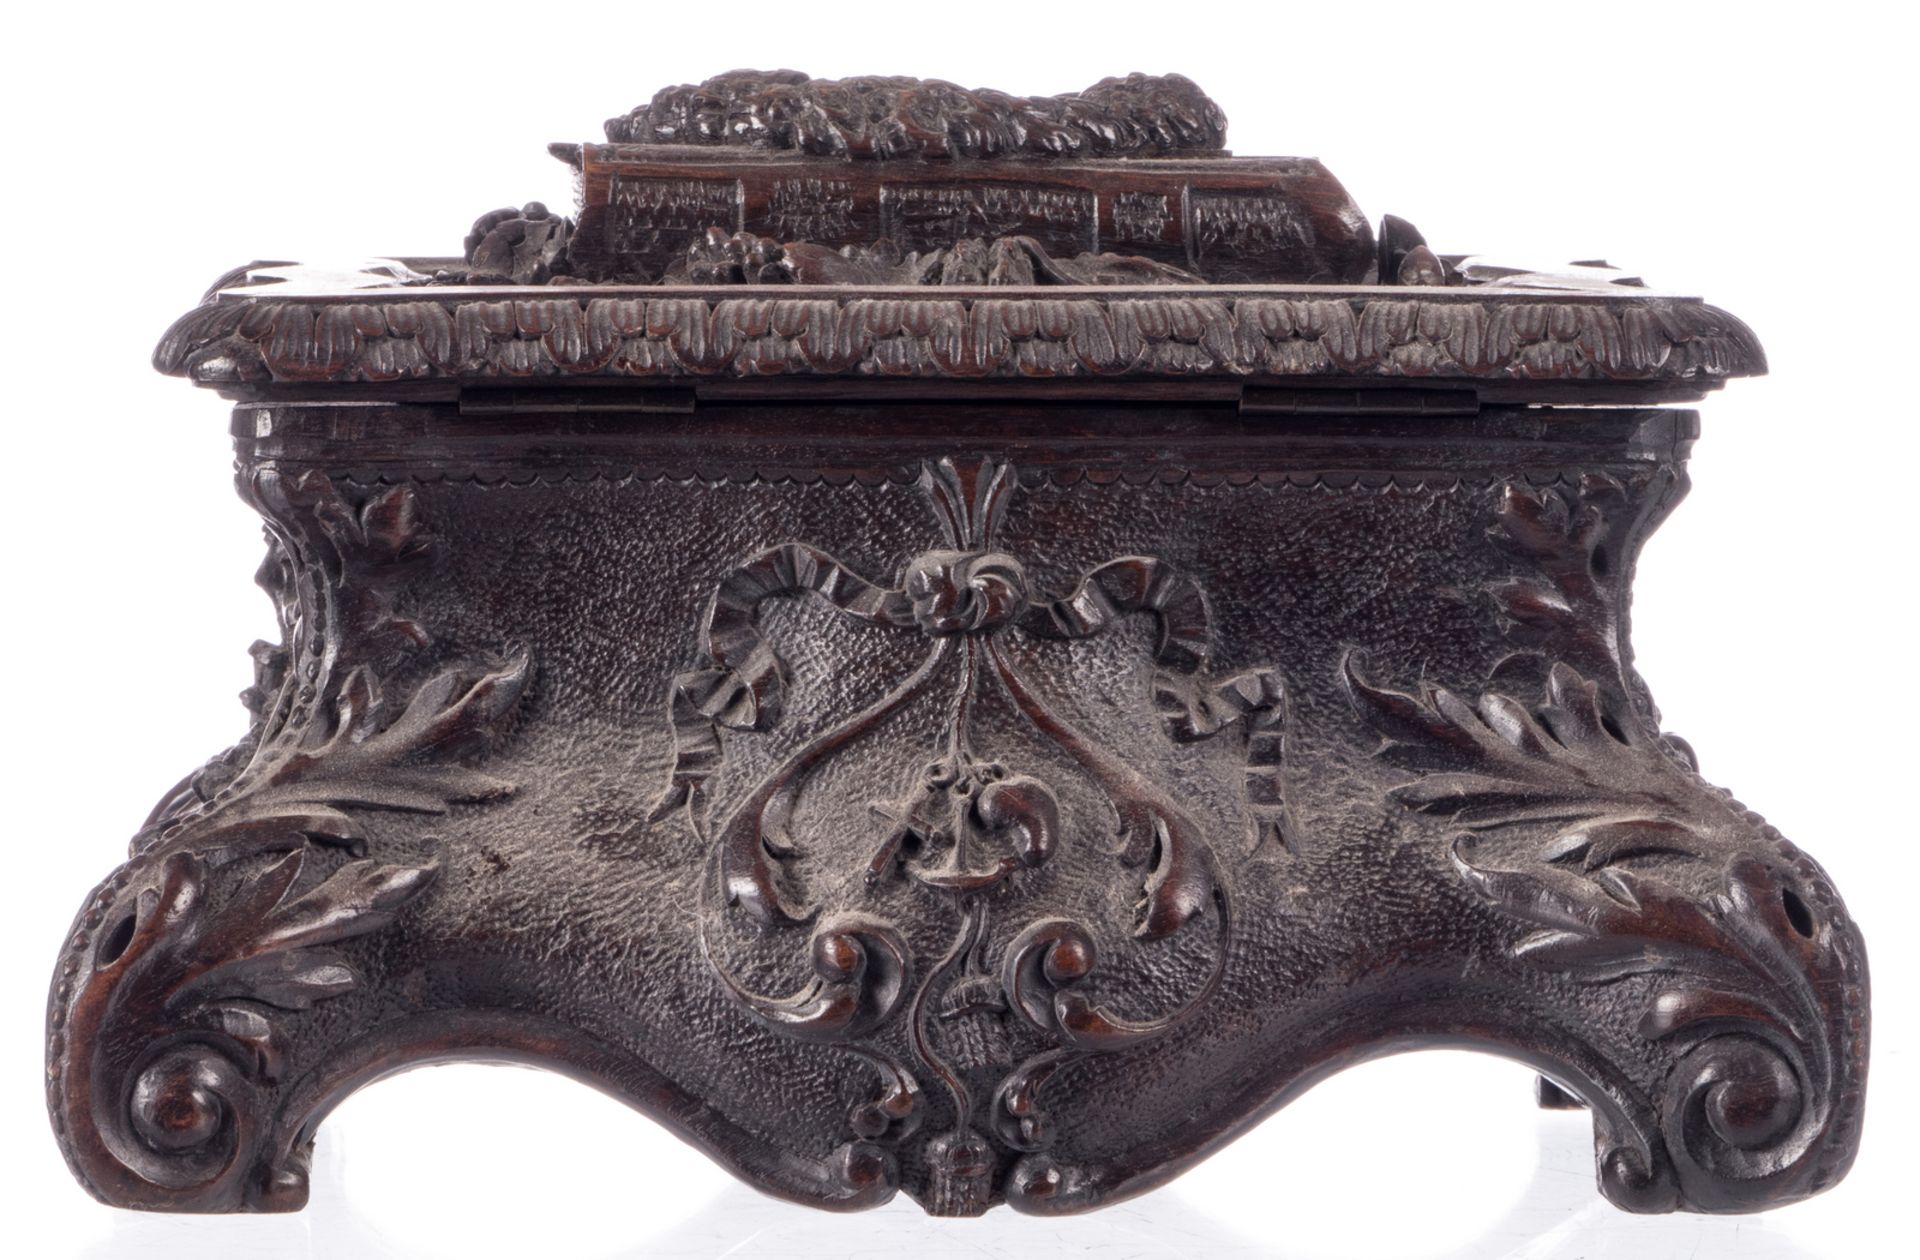 A sculpted walnut jewelry box decorated with religious symbols, H 16 - W 32 - D 26 cm - Bild 4 aus 11